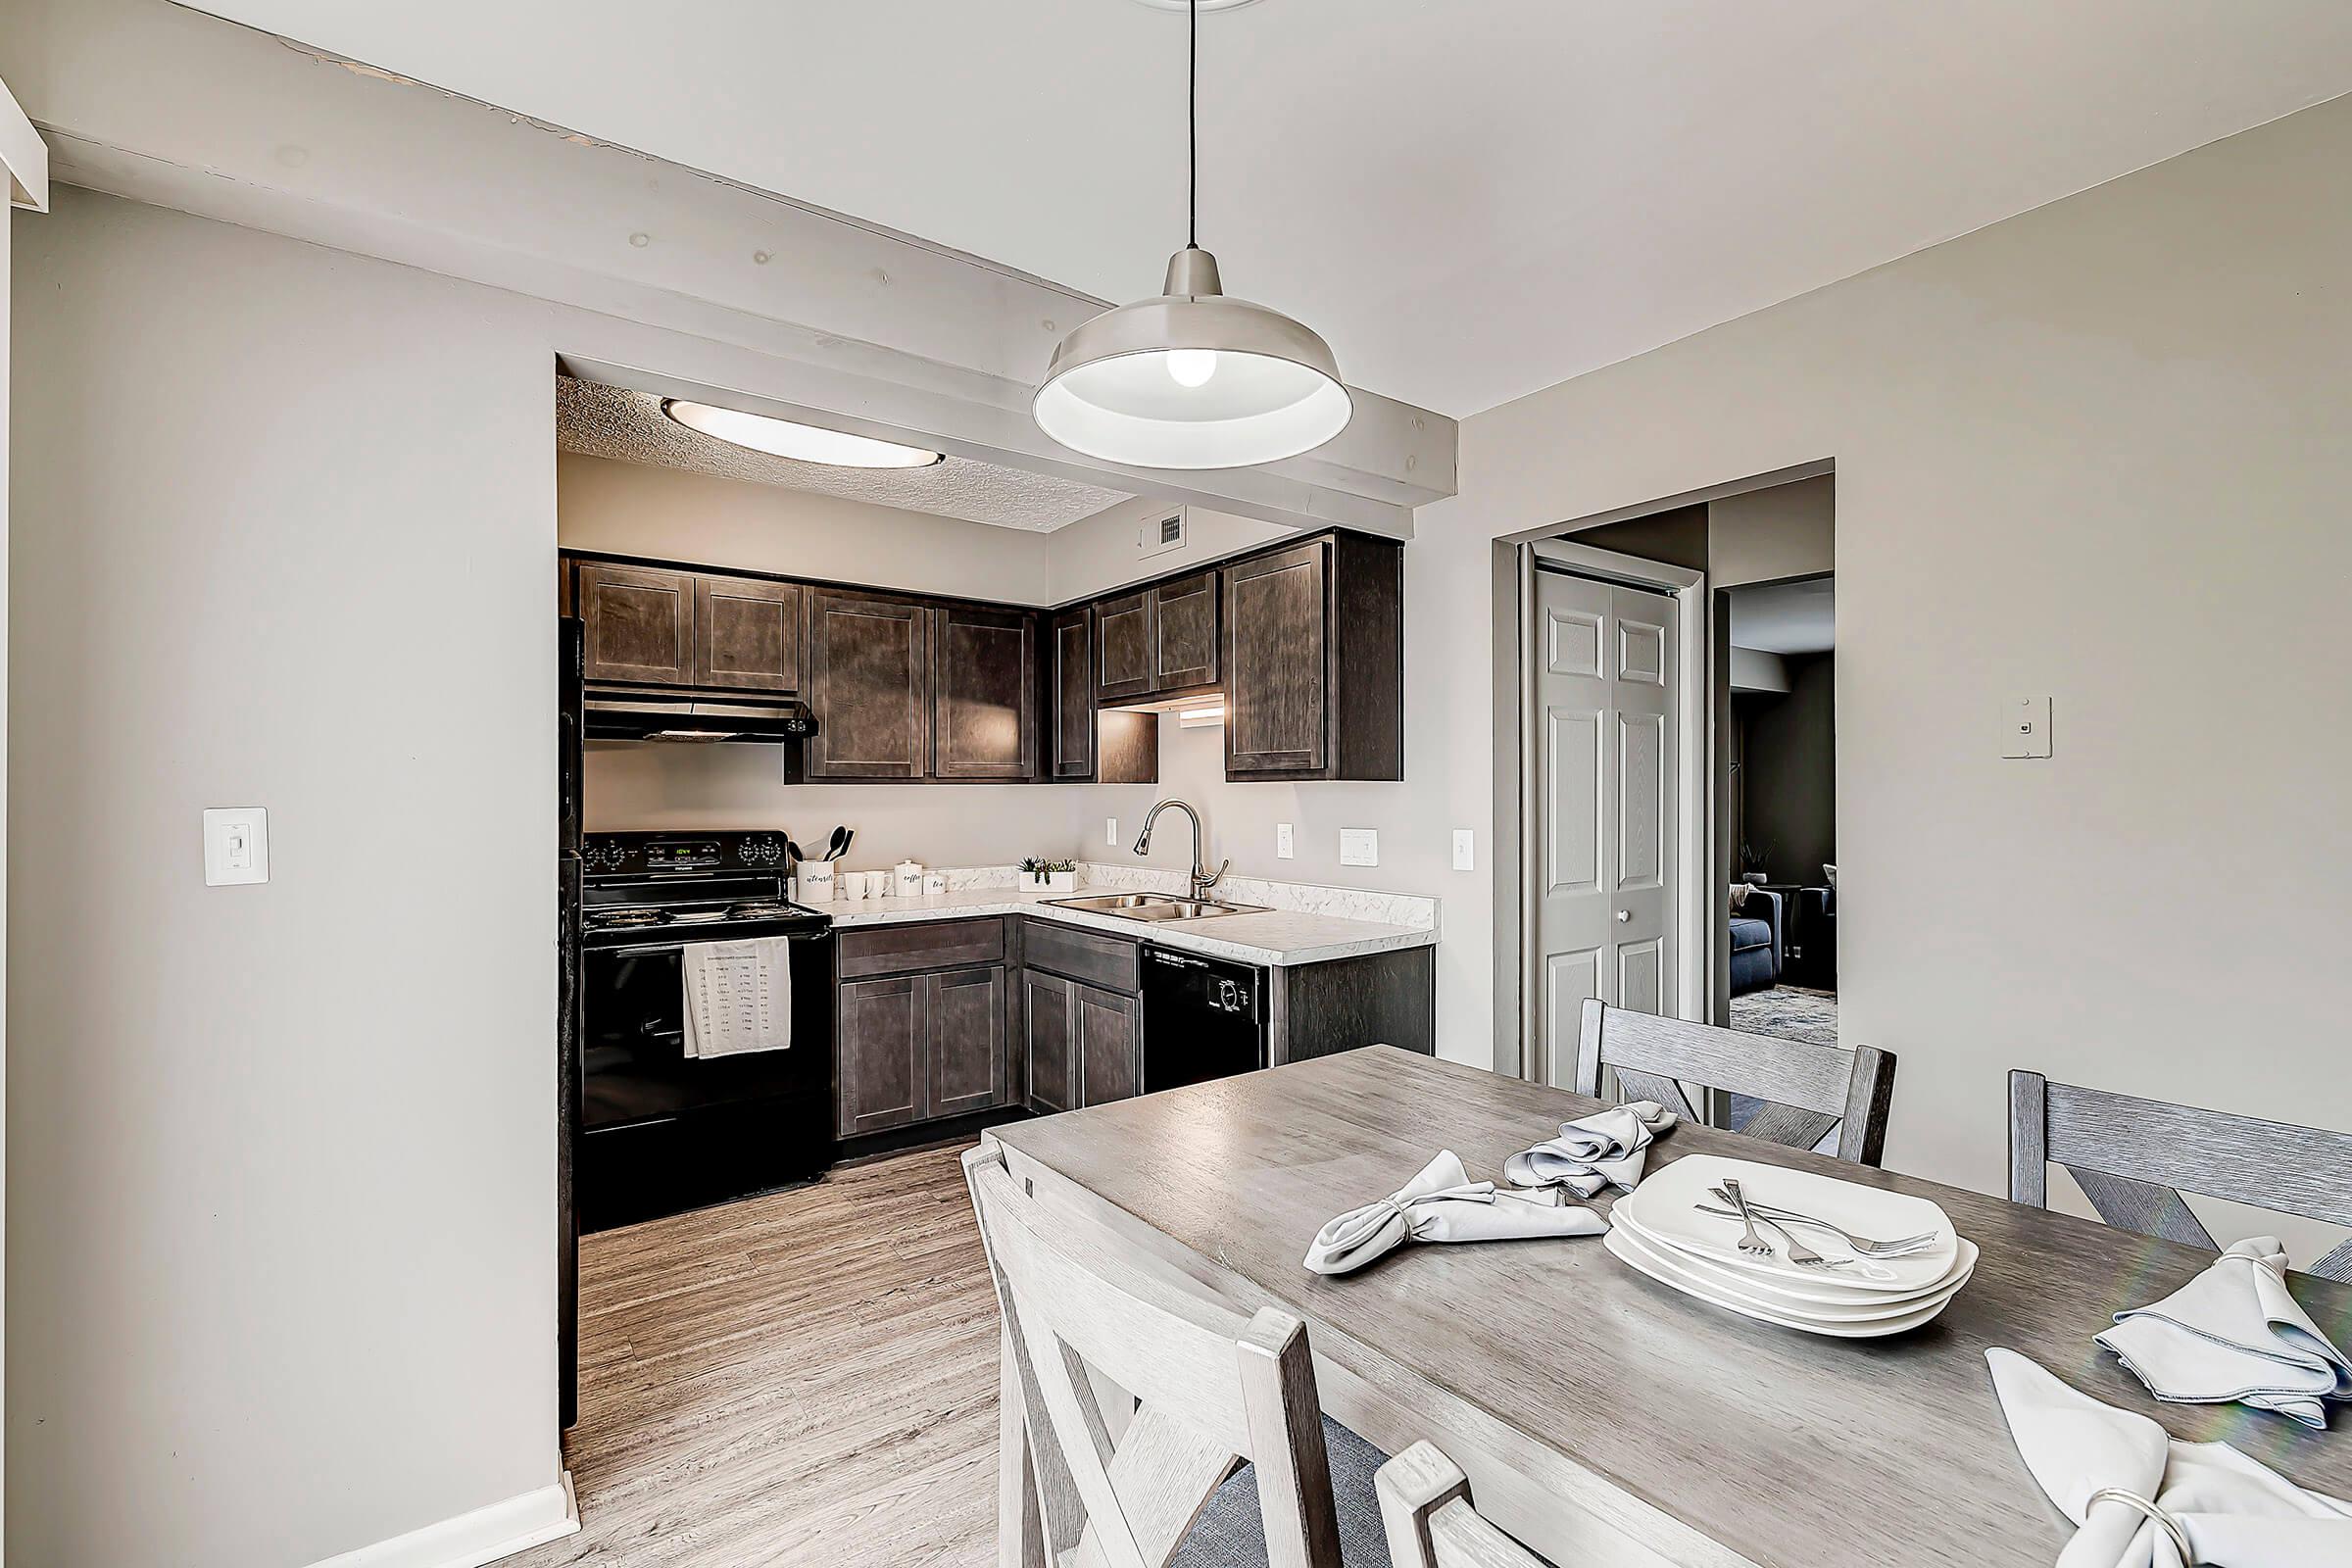 ENJOY HAVING A MEAL IN YOUR NEW PARKTON APARTMENT